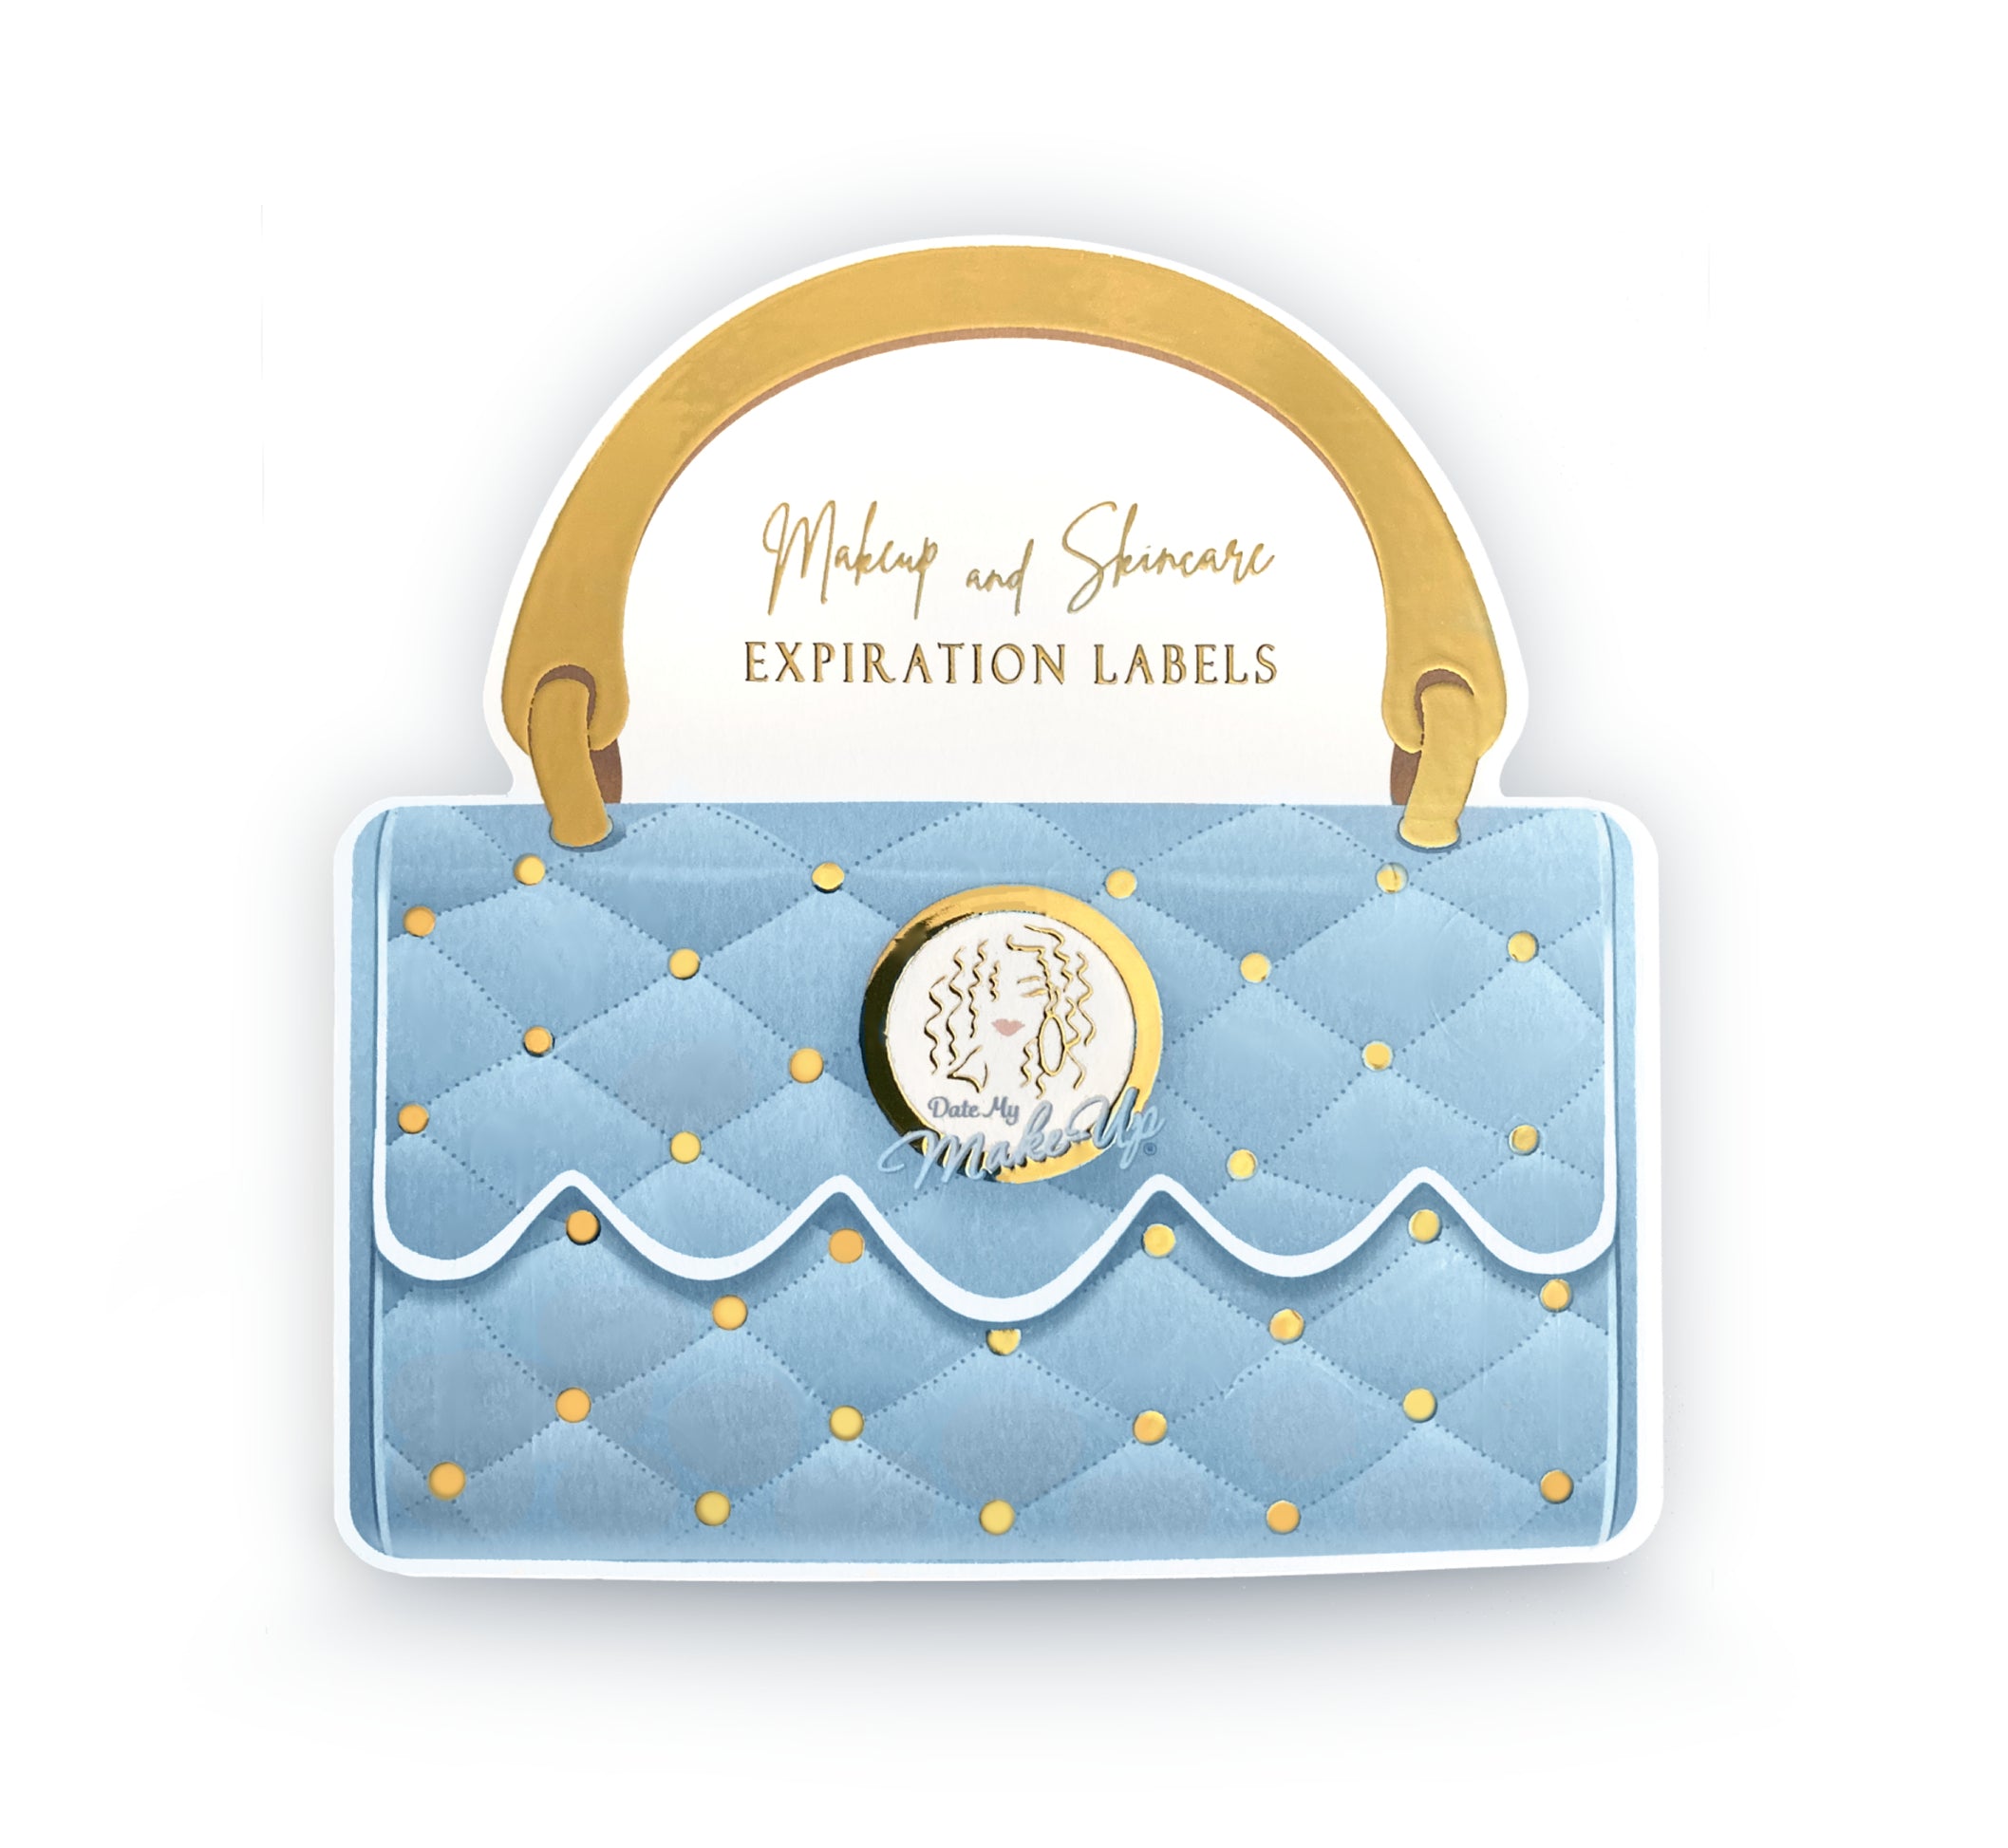 MAKEUP AND SKINCARE EXPIRATION LABEL - The Purse